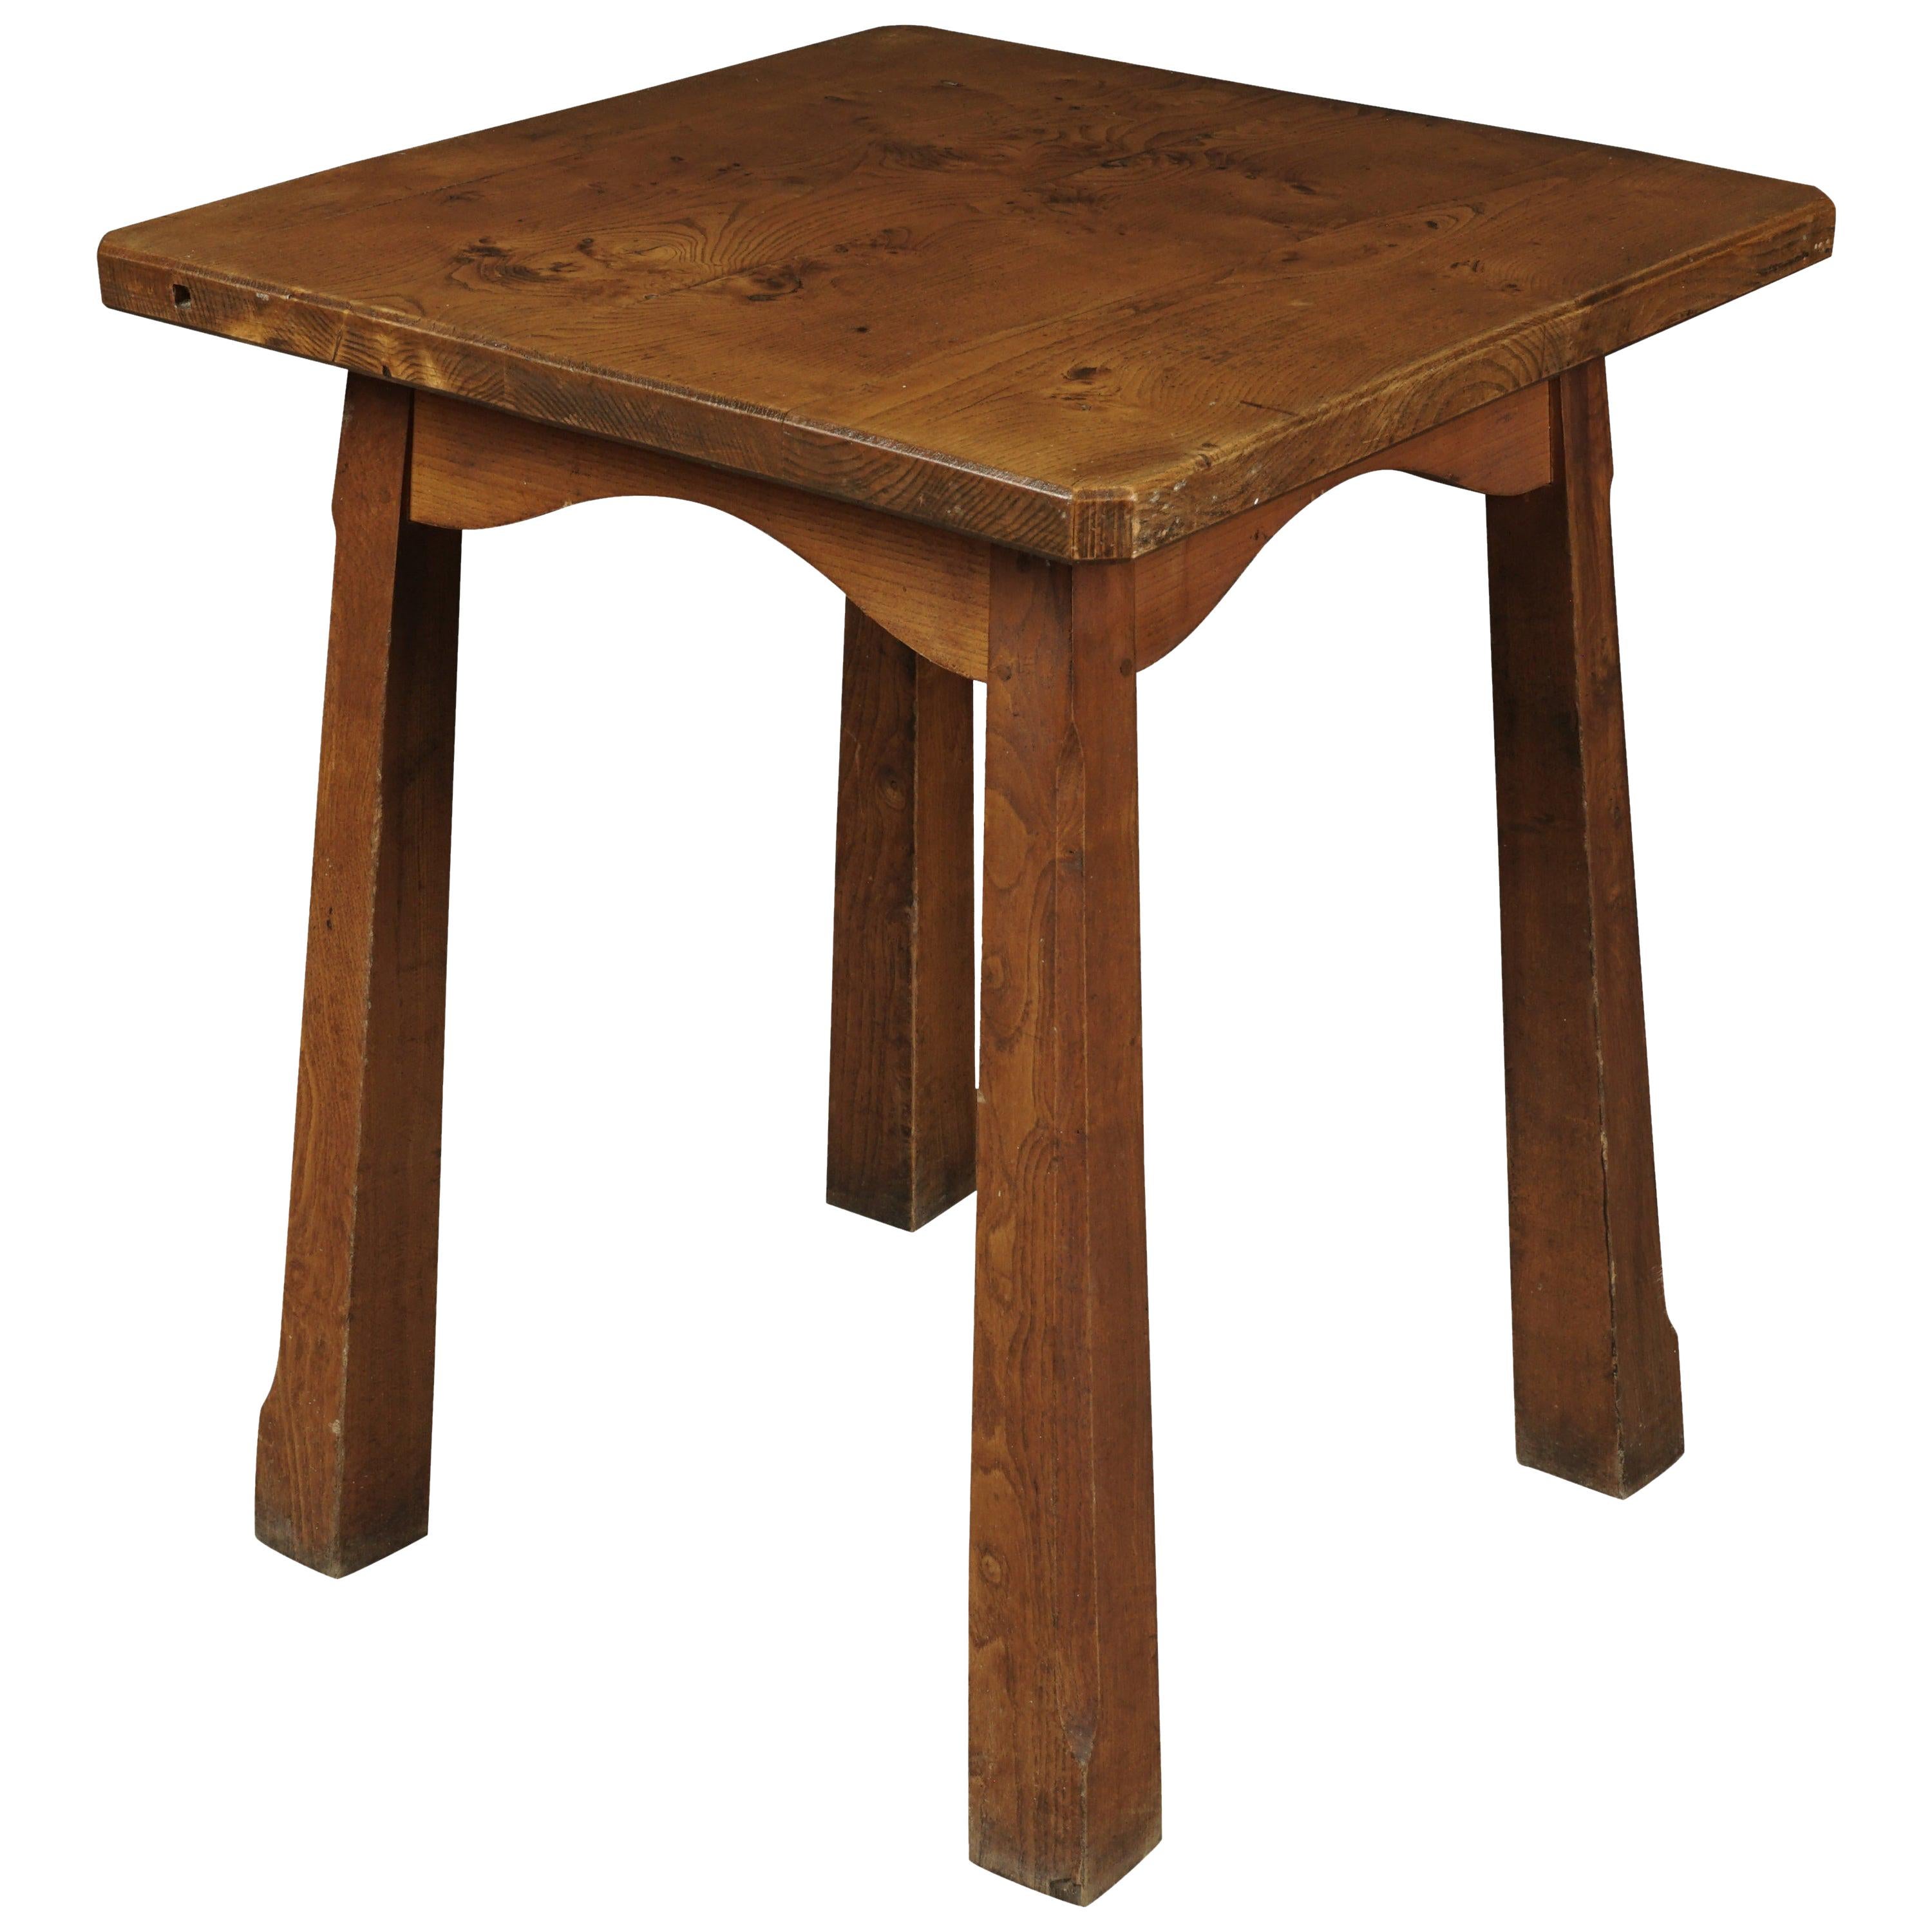 Vintage Pine Reconstruction Table from France, circa 1950